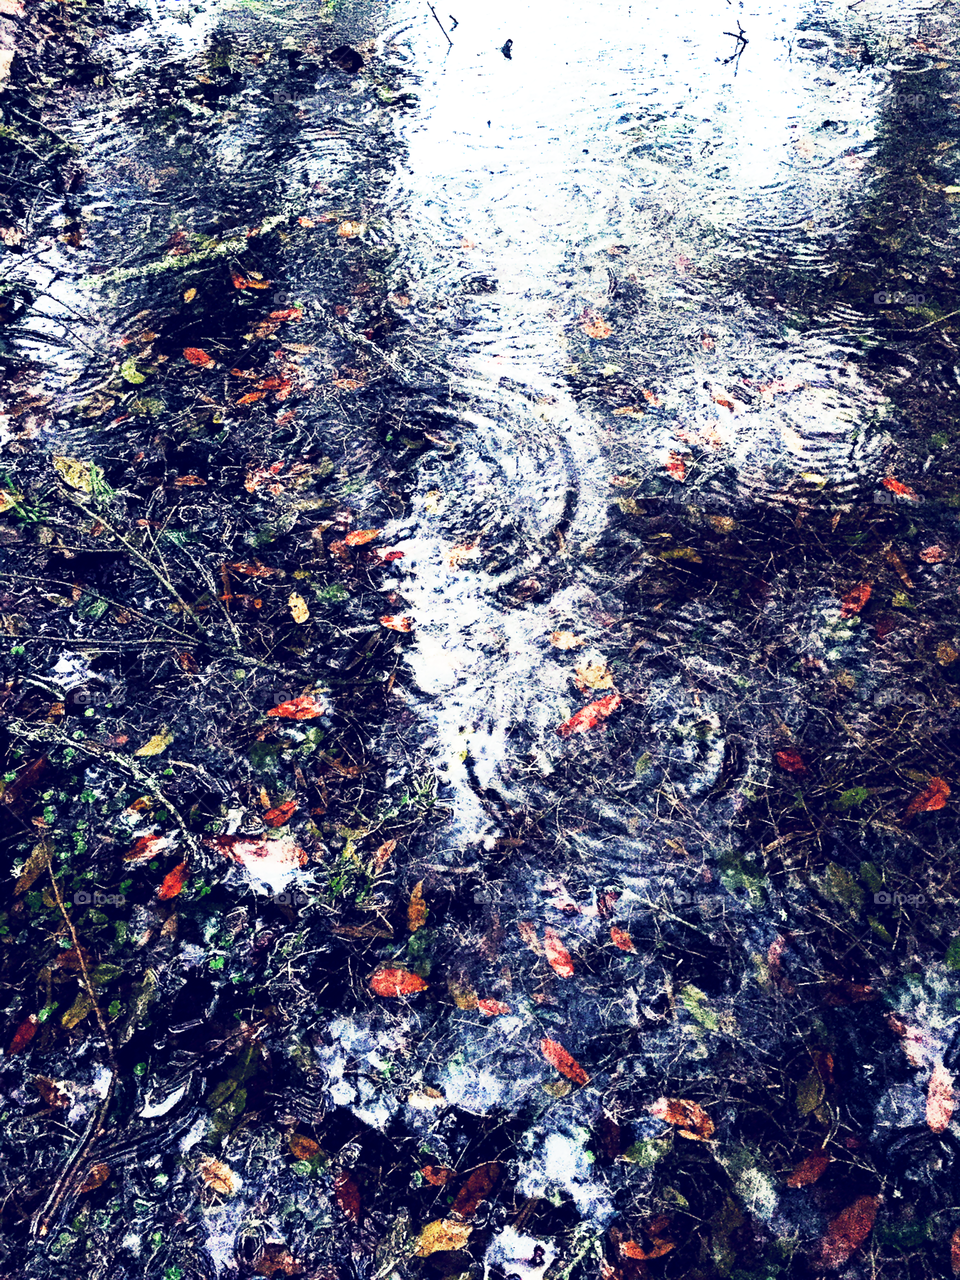 Raindrops on puddles 